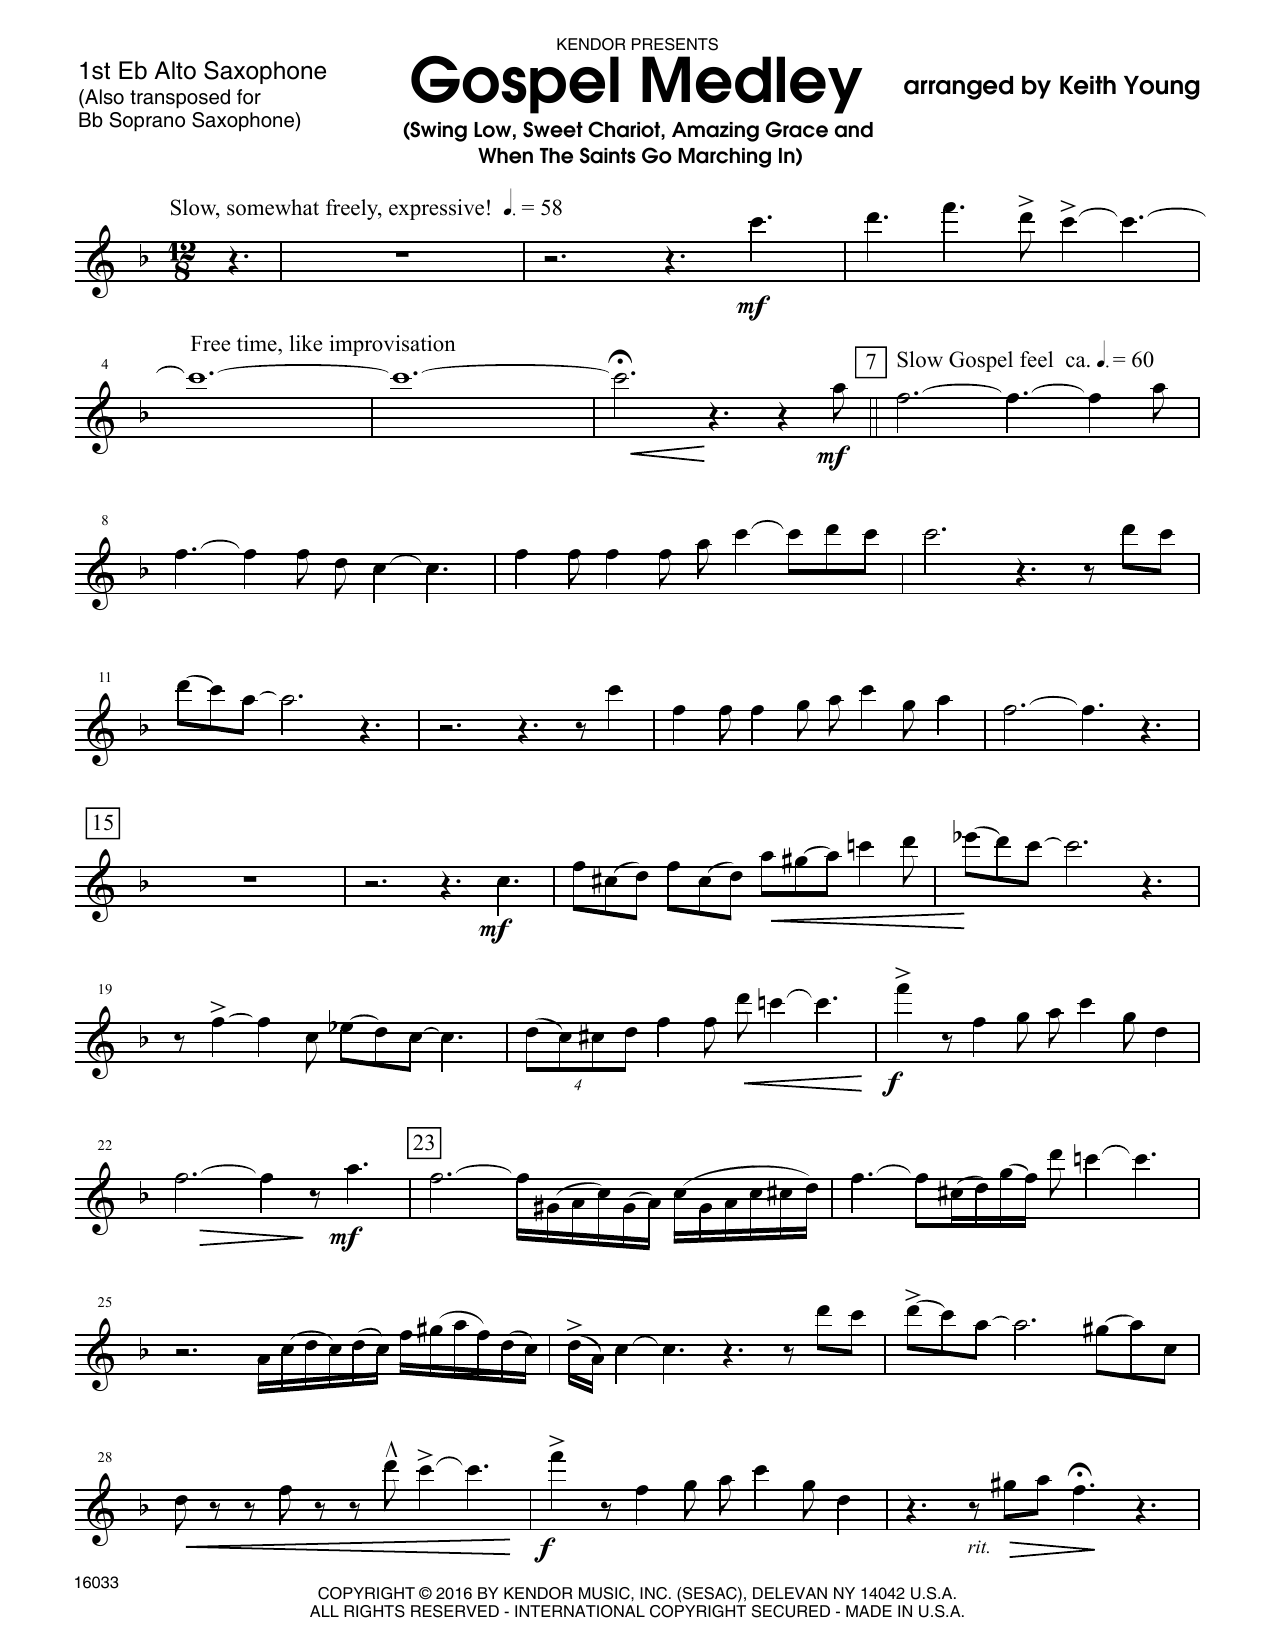 Download Keith Young Gospel Medley - 1st Eb Alto Saxophone Sheet Music